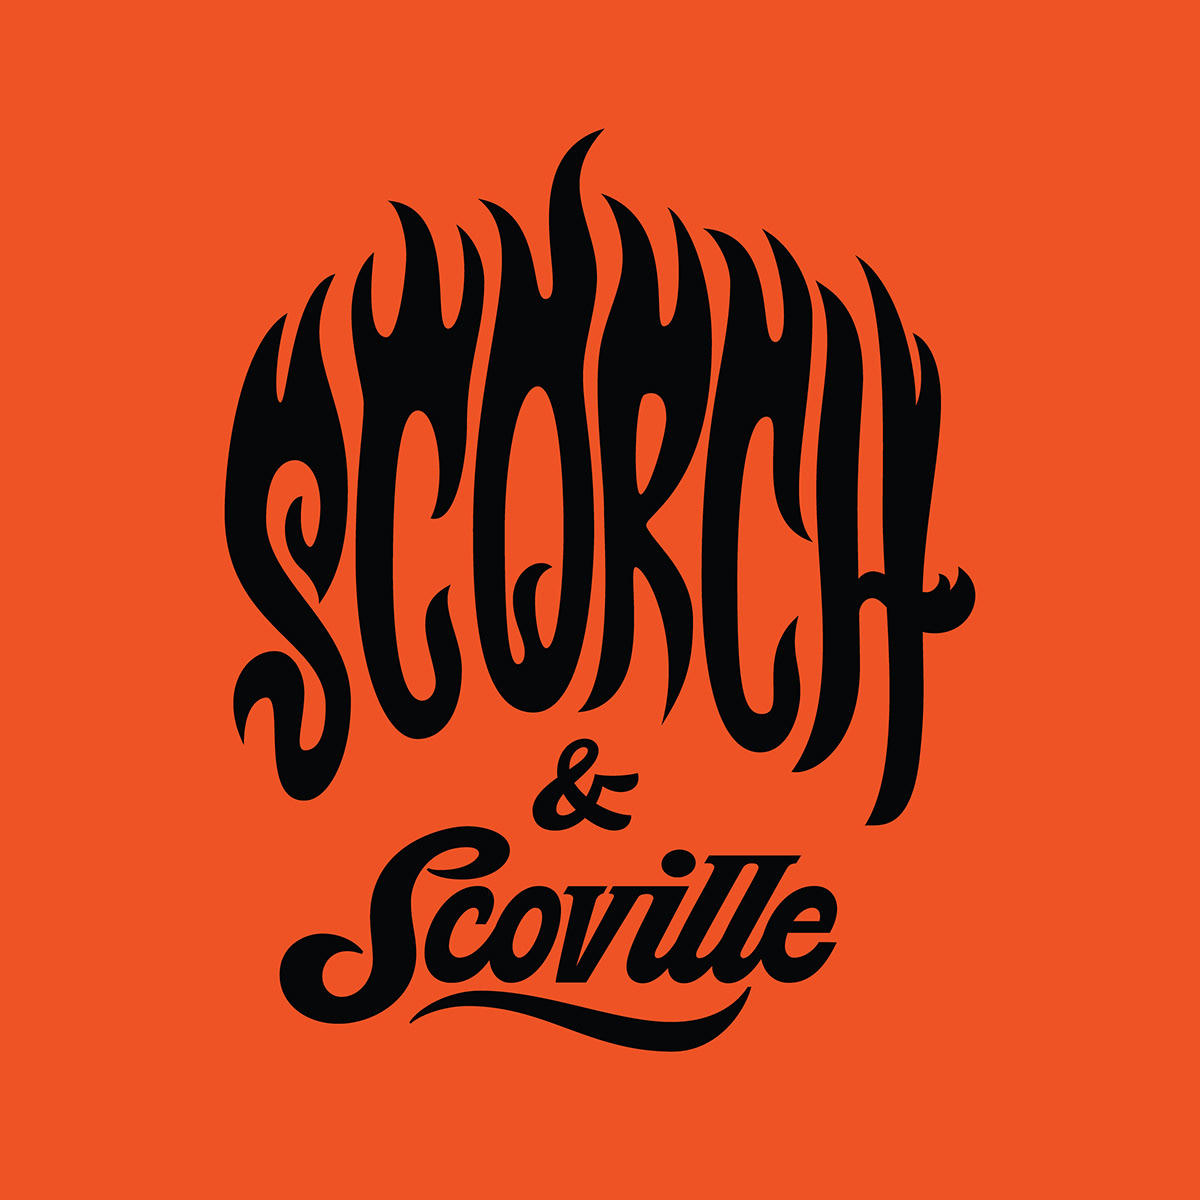 Logo design by Jeremy Friend custom hand lettered in a flame style for Scorch & Scoville hot sauce. 